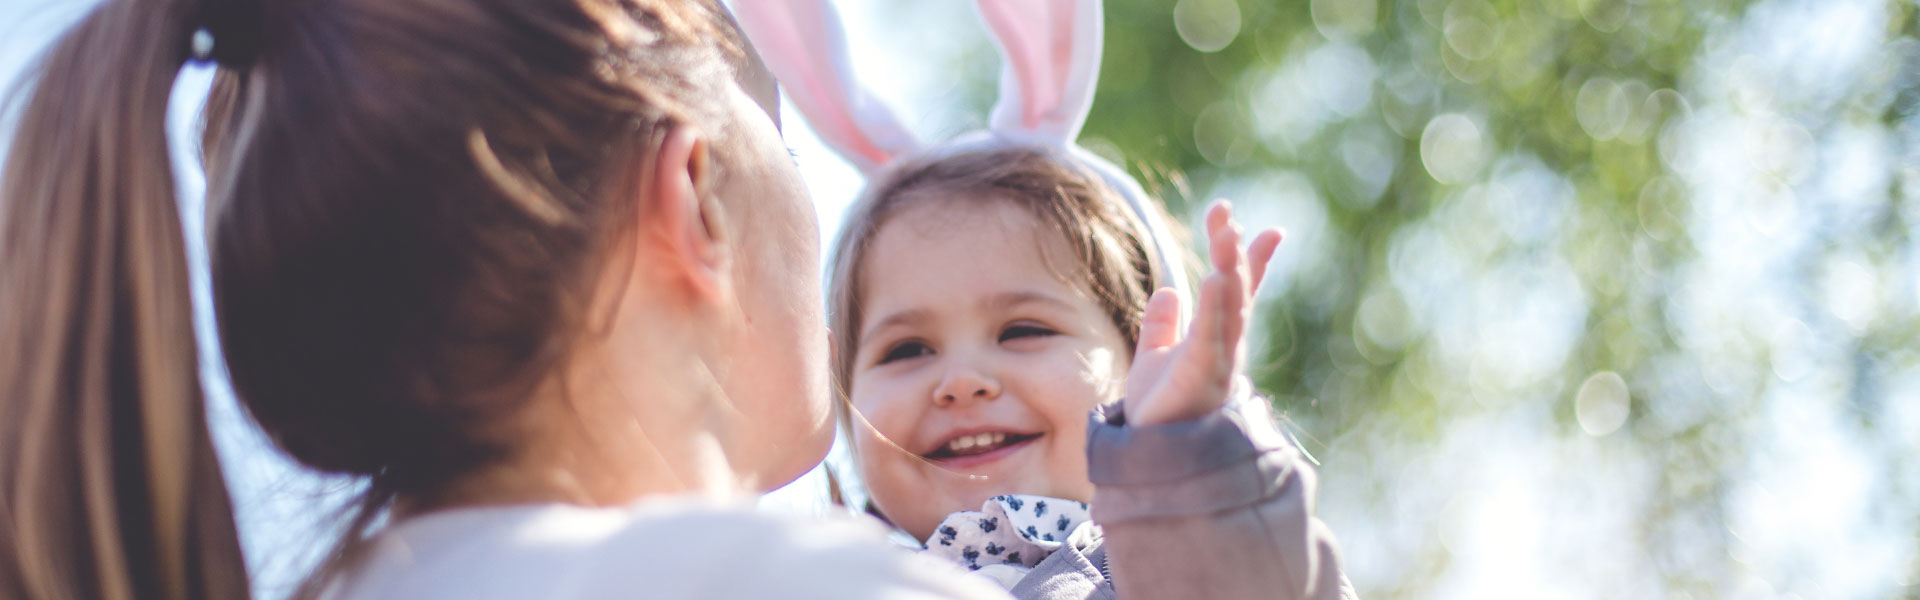 Woman holding a smiling baby wearing fluffy pink Easter bunny ears